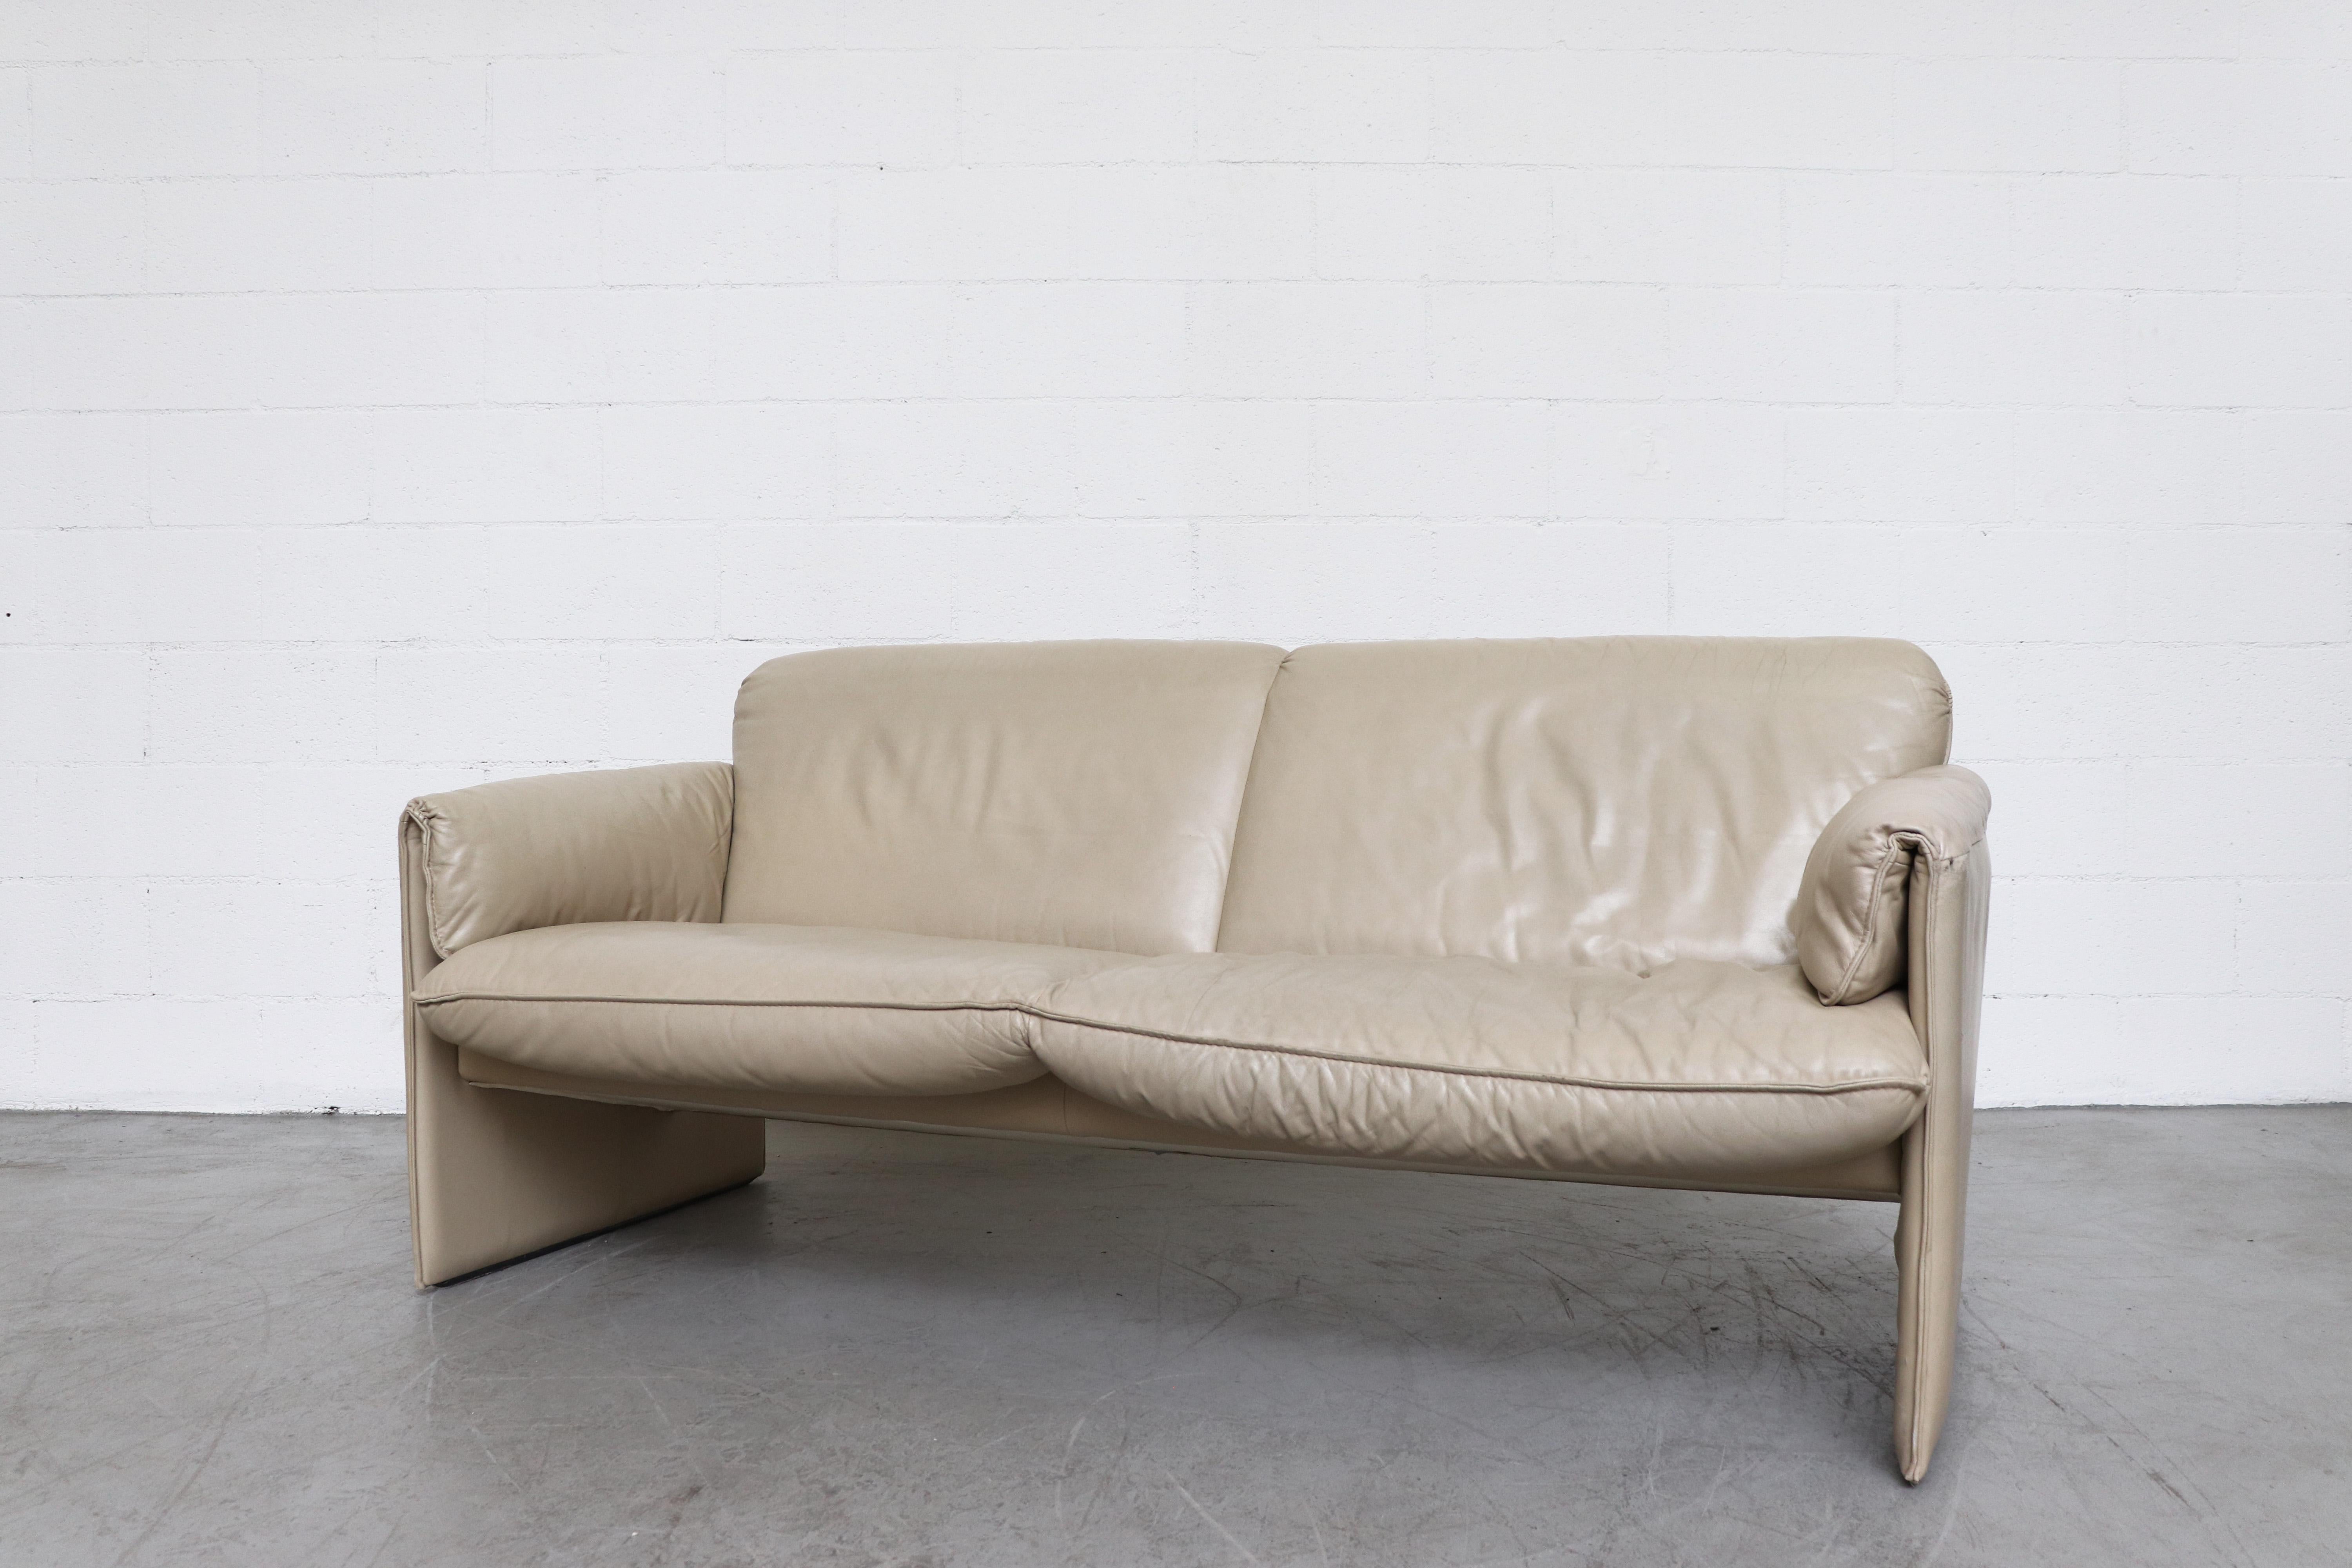 Leolux Vanilla Bean toned leather 'Bora Bora' 2-seat sofa by Leolux. In original condition with visible signs of wear consistent with its age and use, details in photos.